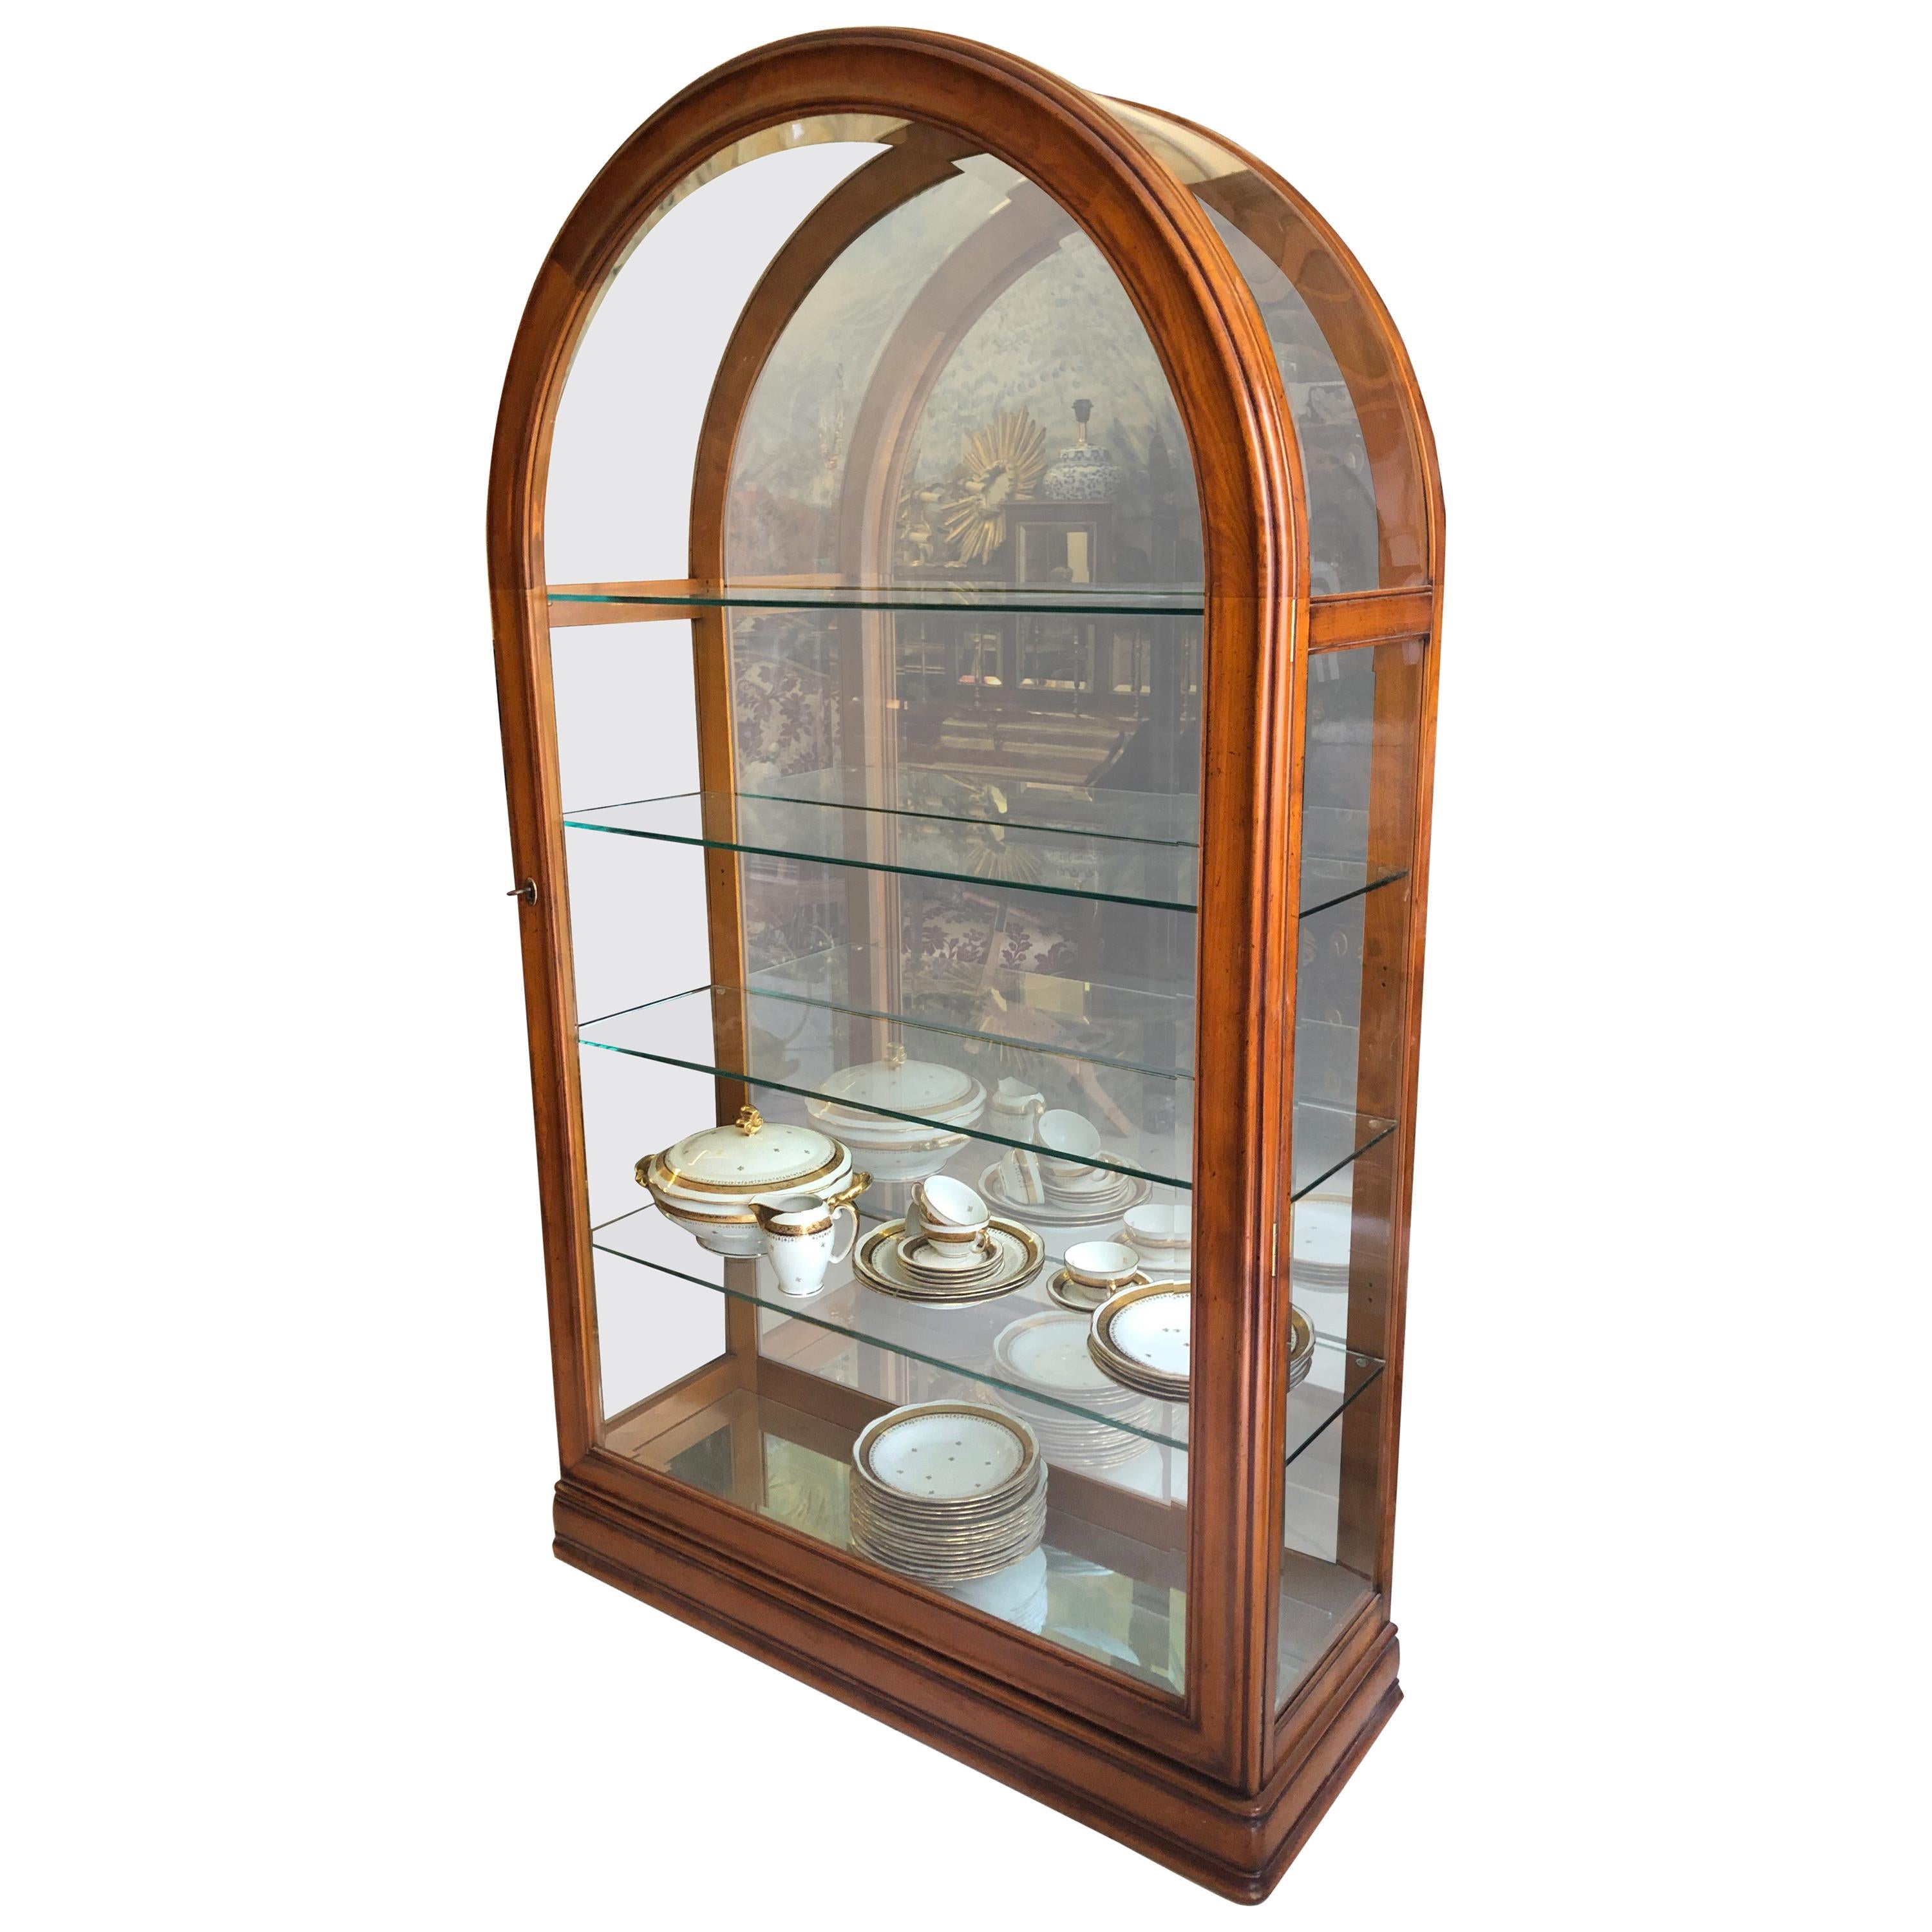 20th Century Grand Demilune Mahogany Display Cabinet or Vitrine with Mirror Back For Sale